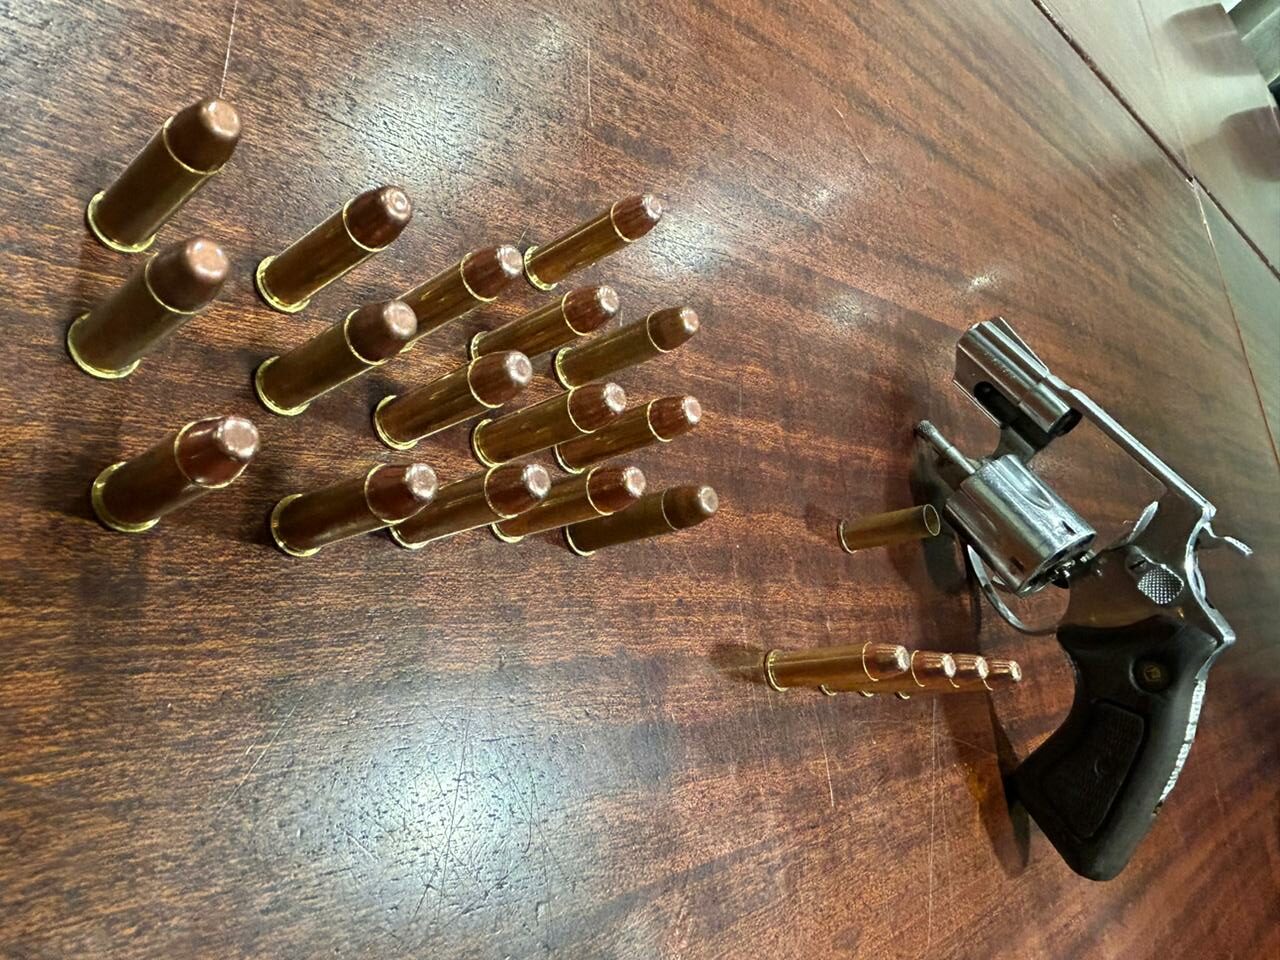 Two suspects in court on charges of possession of prohibited and unlicensed firearms and ammunition